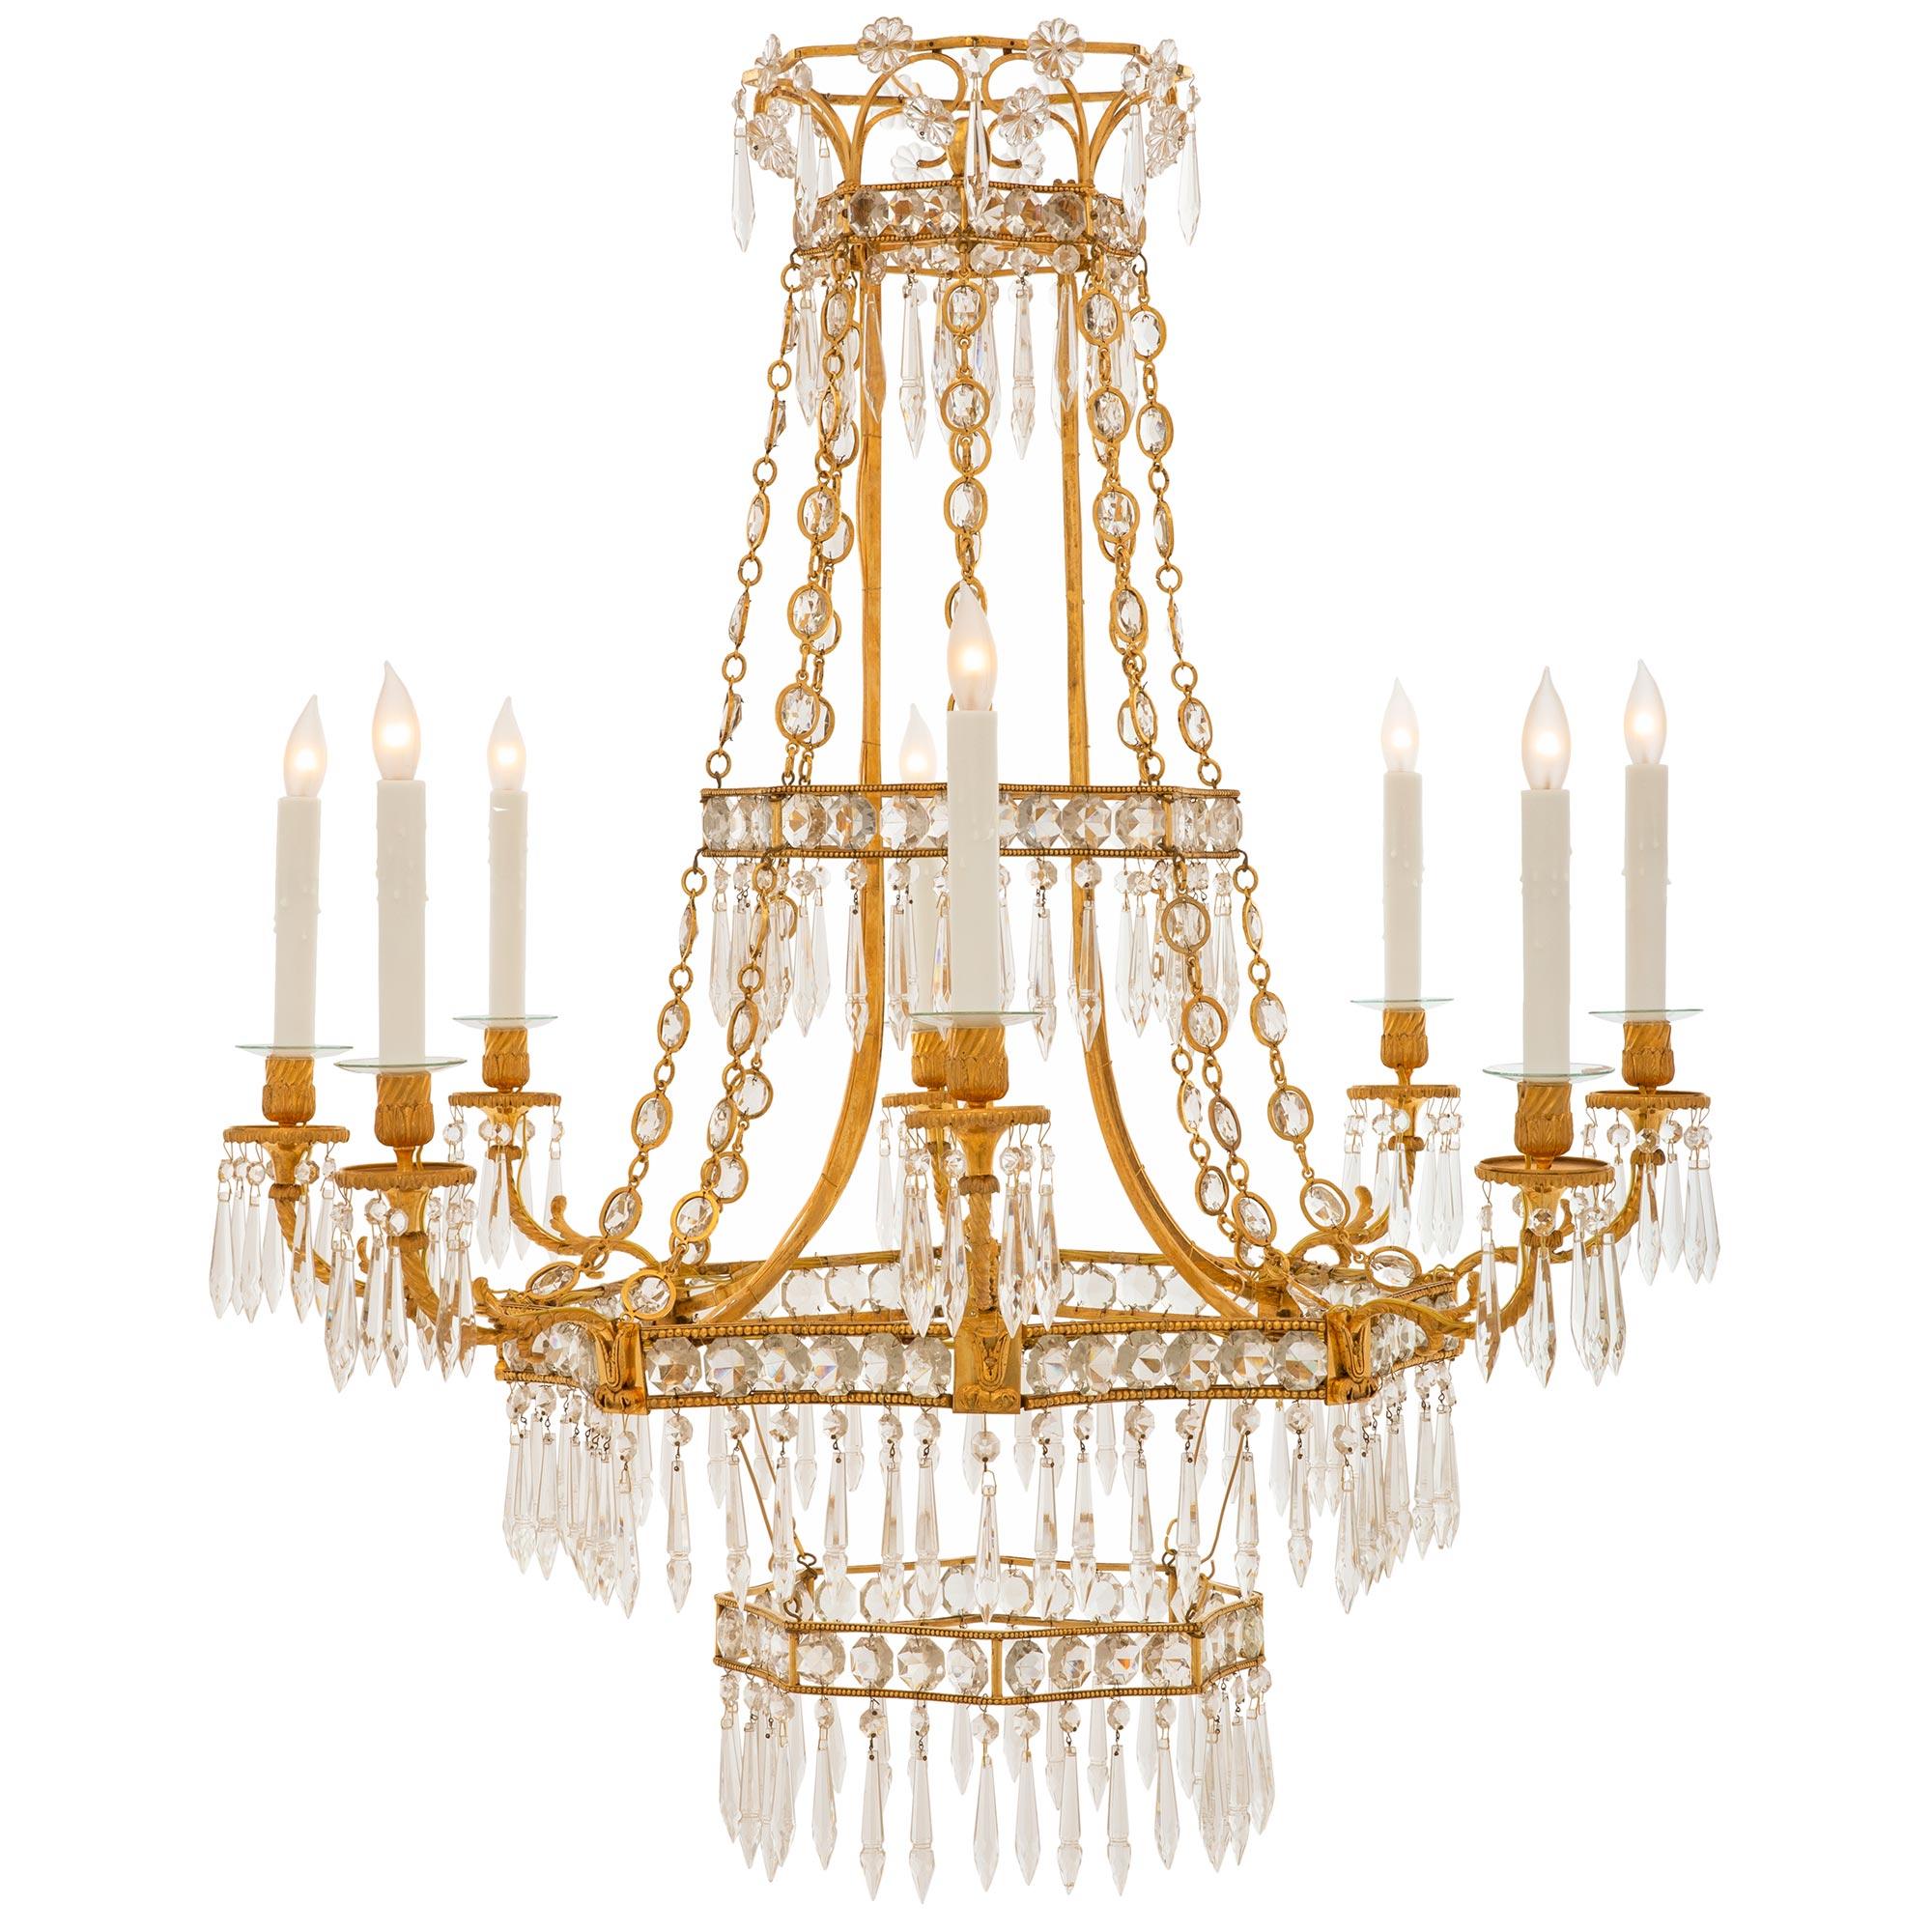 A striking and extremely decorative Baltic 19th century Louis XVI st. crystal and ormolu chandelier. The eight arm chandelier is centered by a most elegant octagonal crown like bottom tier with lovely fitted cut crystals and beautiful prism shaped